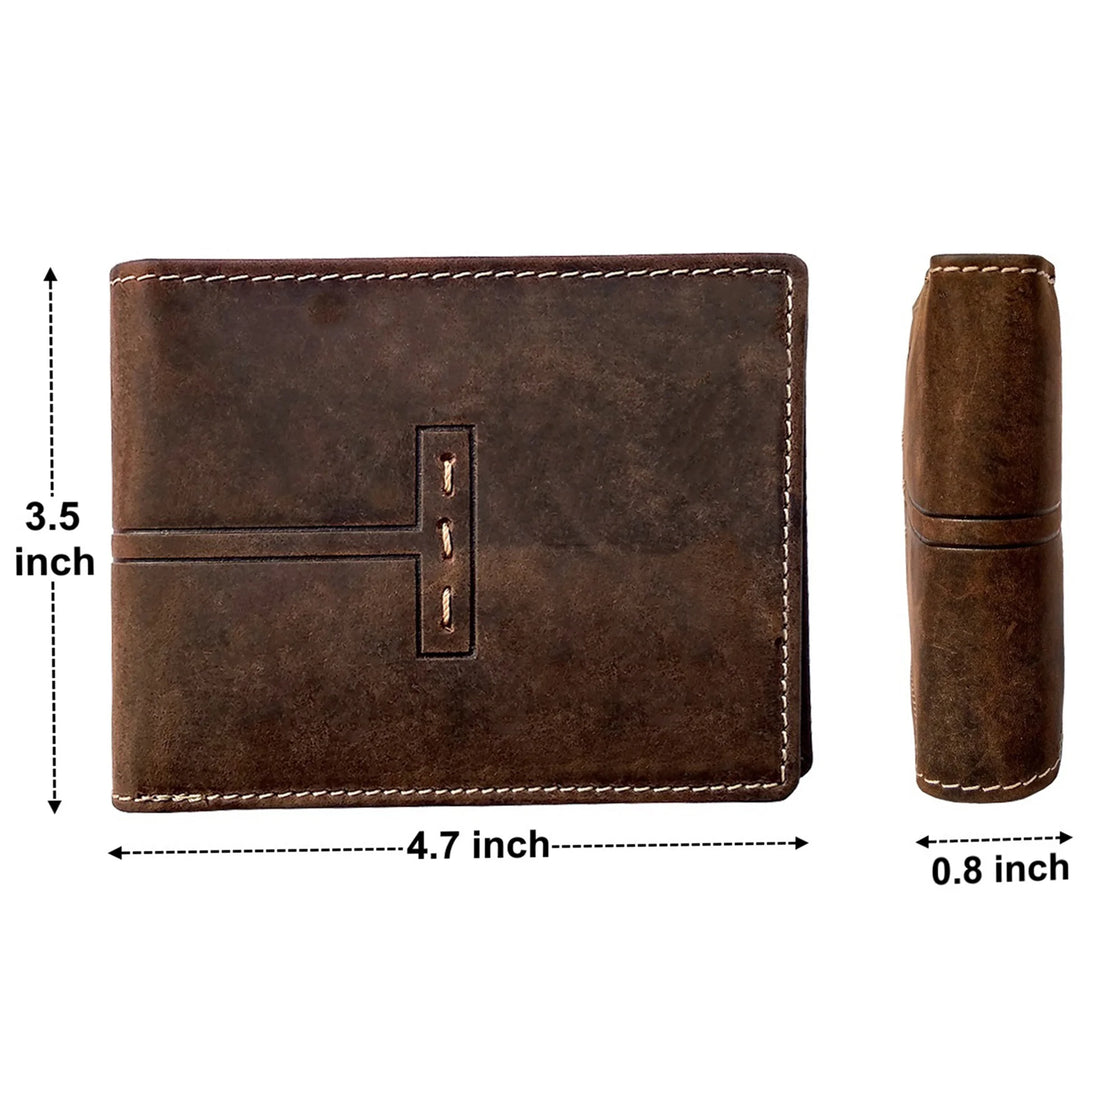 Defnes Chain Wallets for Men Genuine Leather Bifold Wallet RFID Blocking Mens Purse Credit Card with Coin Pocket, Men's, Size: One size, Brown